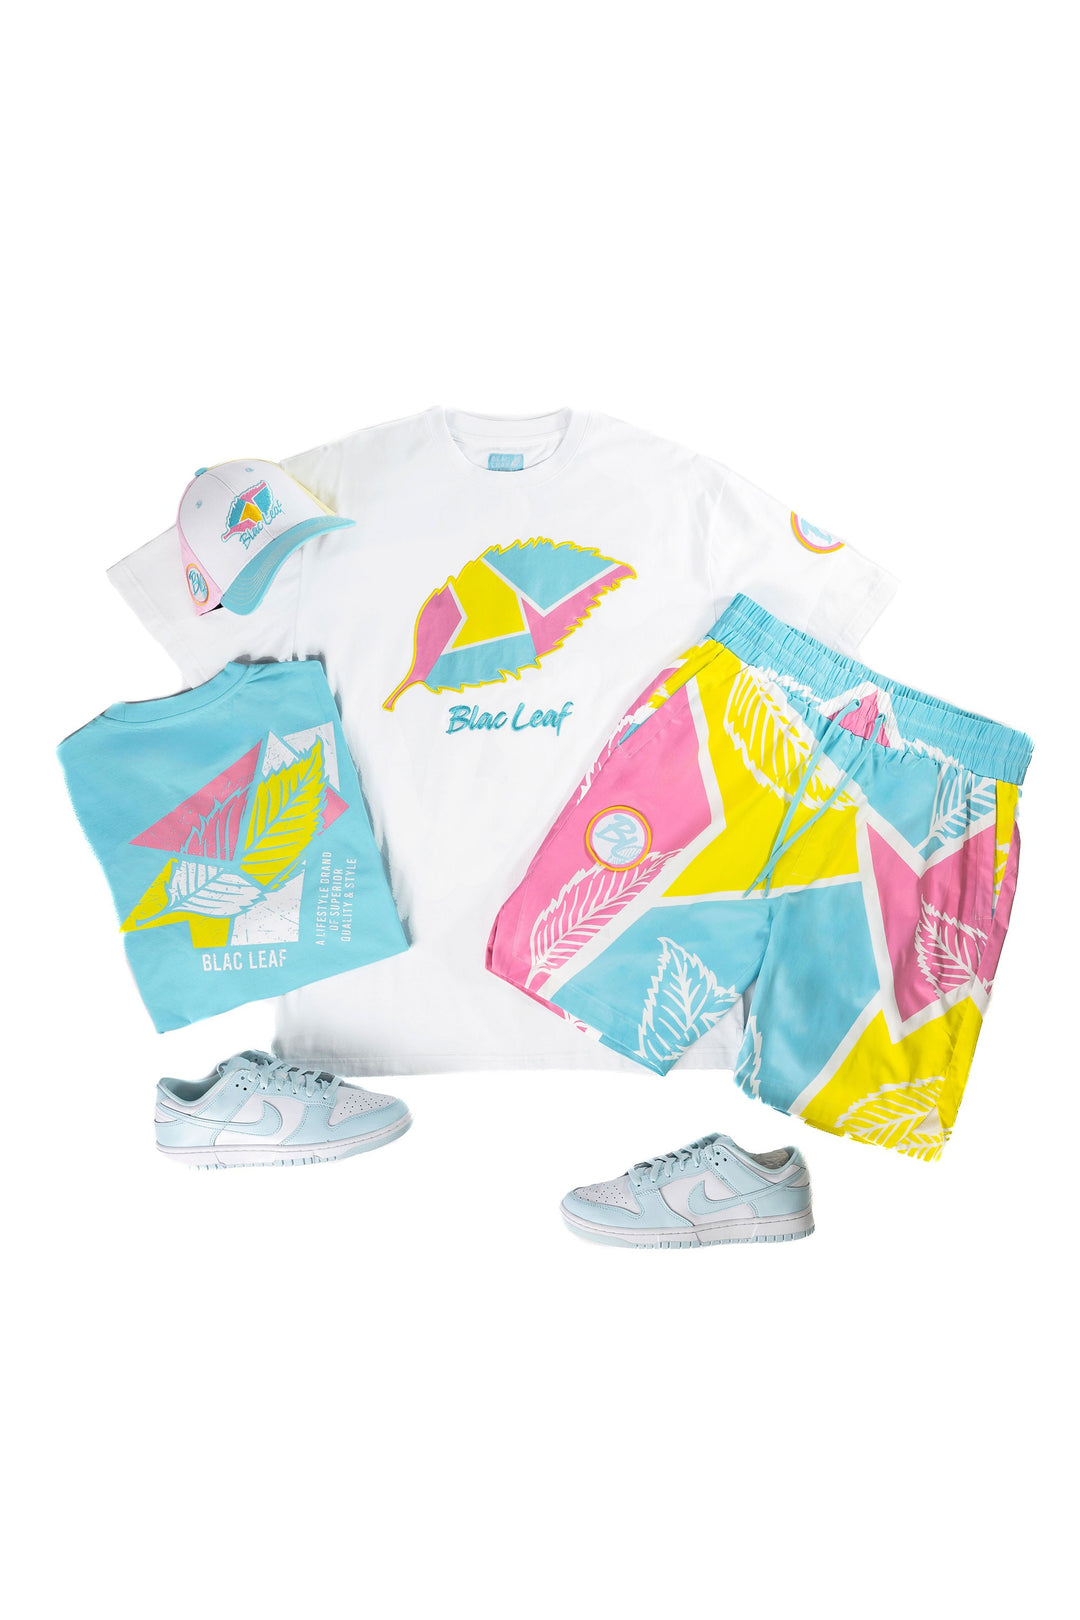 2 Geometric Tees, Shorts And Hat Combo